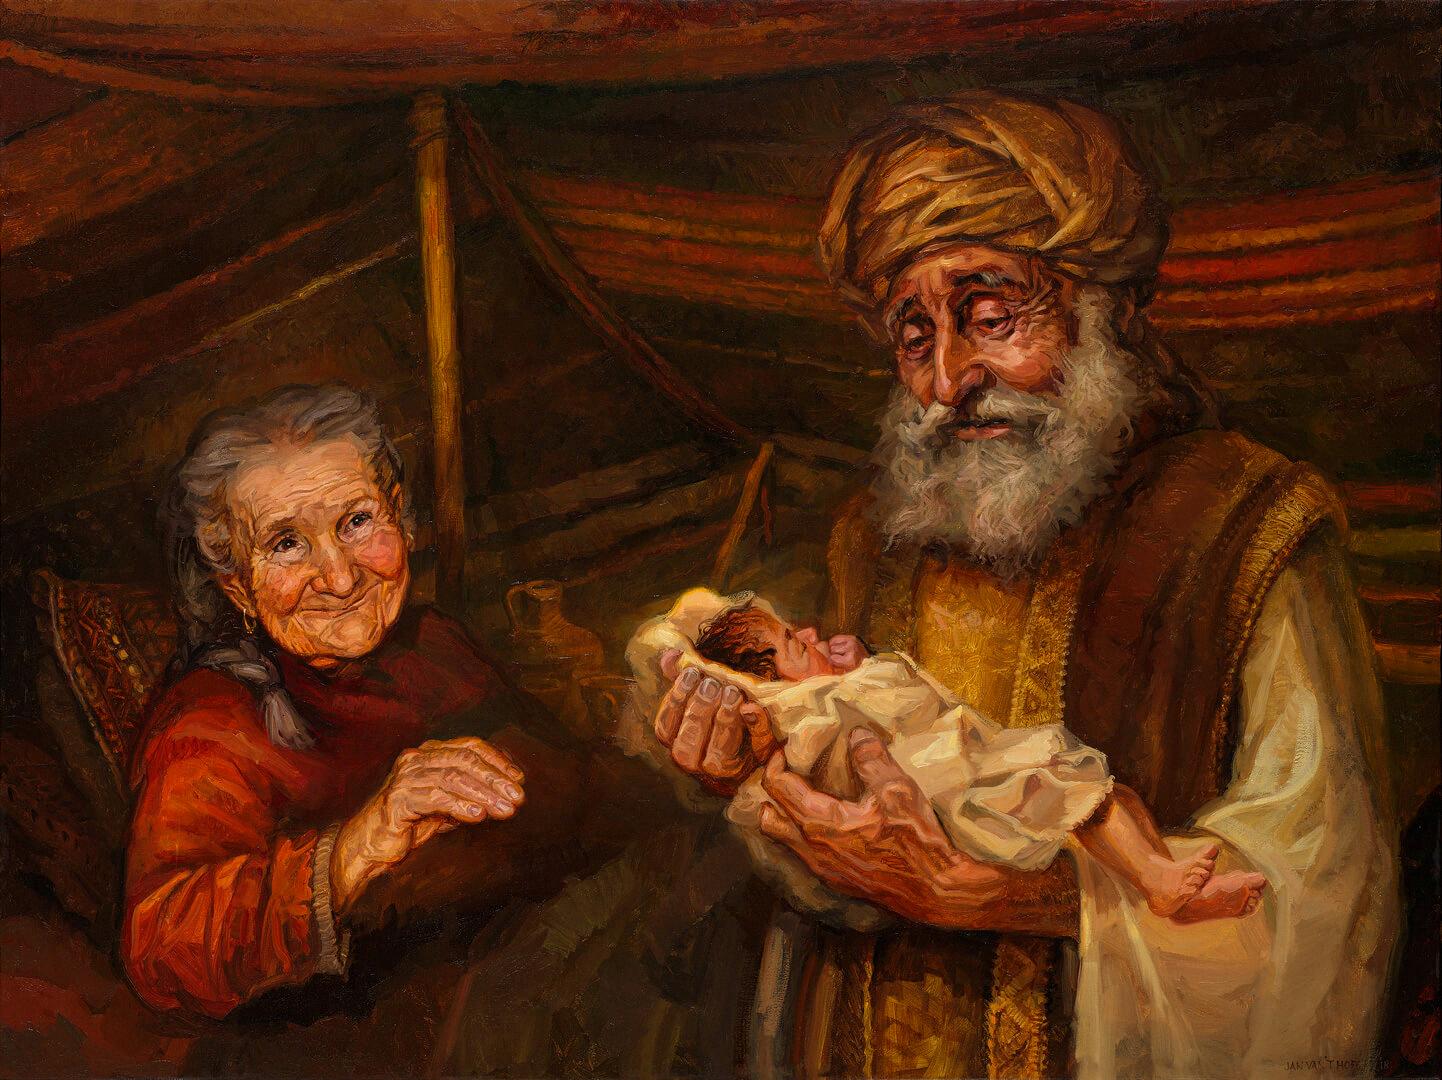 how old was sarah when isaac was born